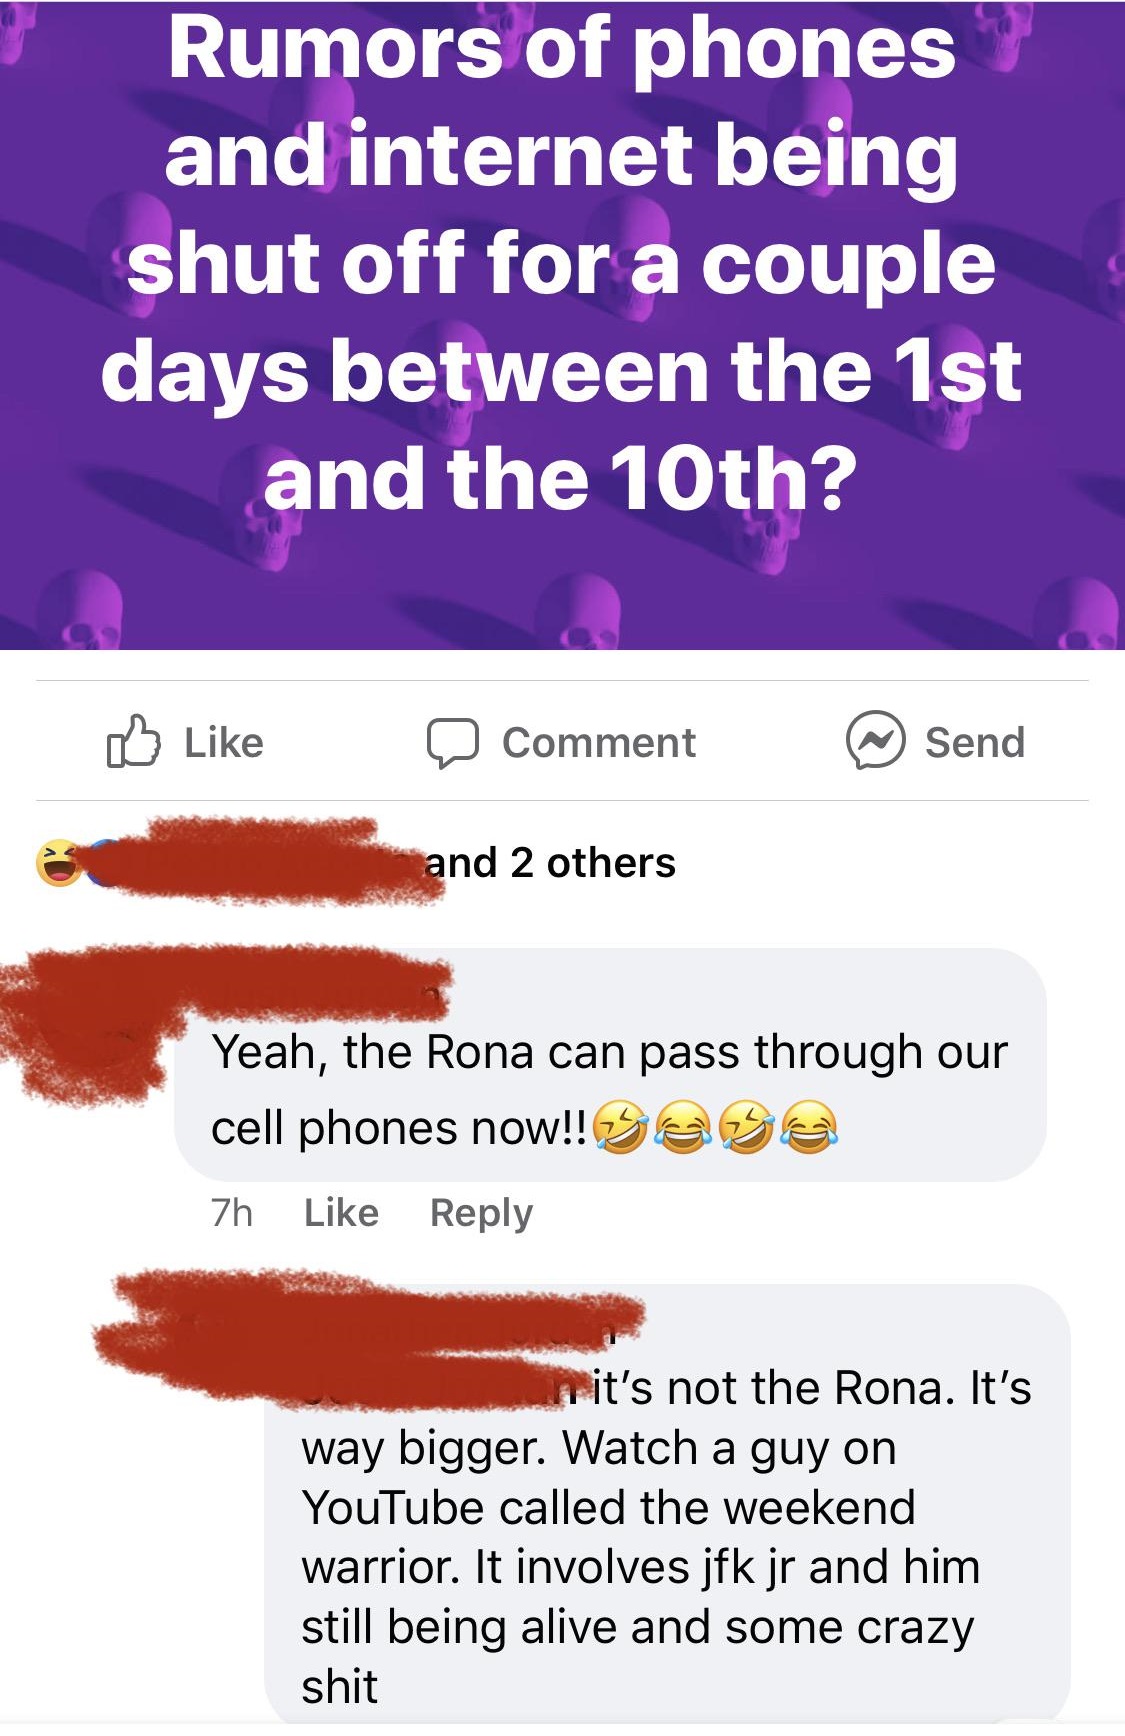 internet retailer - Rumors of phones and internet being shut off for a couple days between the 1st and the 10th? D Comment @ Send and 2 others Yeah, the Rona can pass through our cell phones now!! Sasa 7h nit's not the Rona. It's way bigger. Watch a guy o